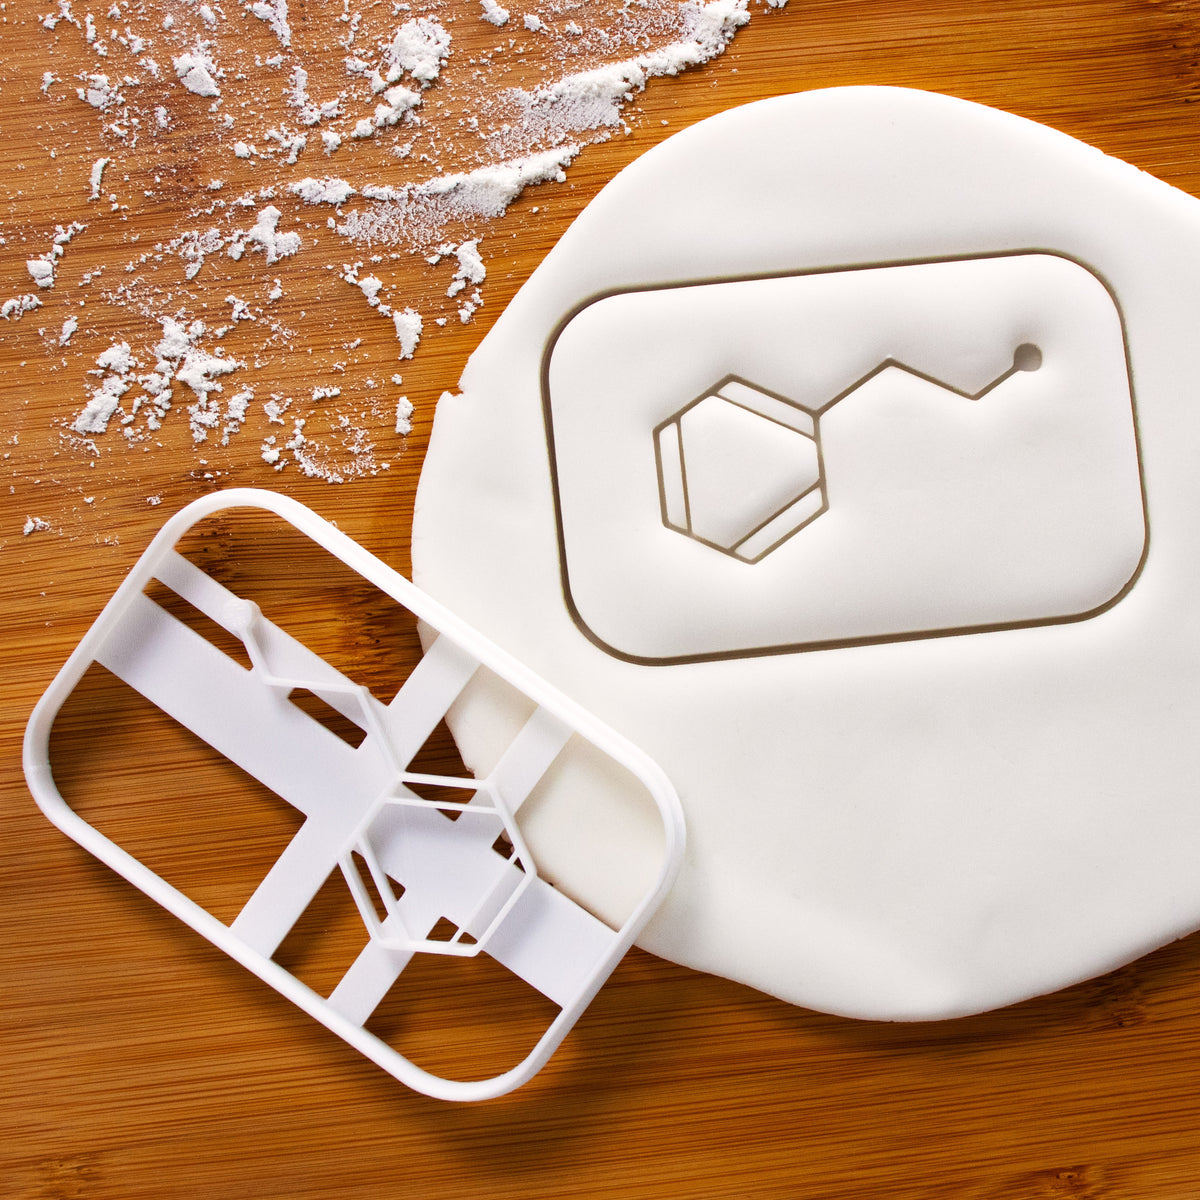 phenylethylamine molecule cookie cutter pressed on fondant